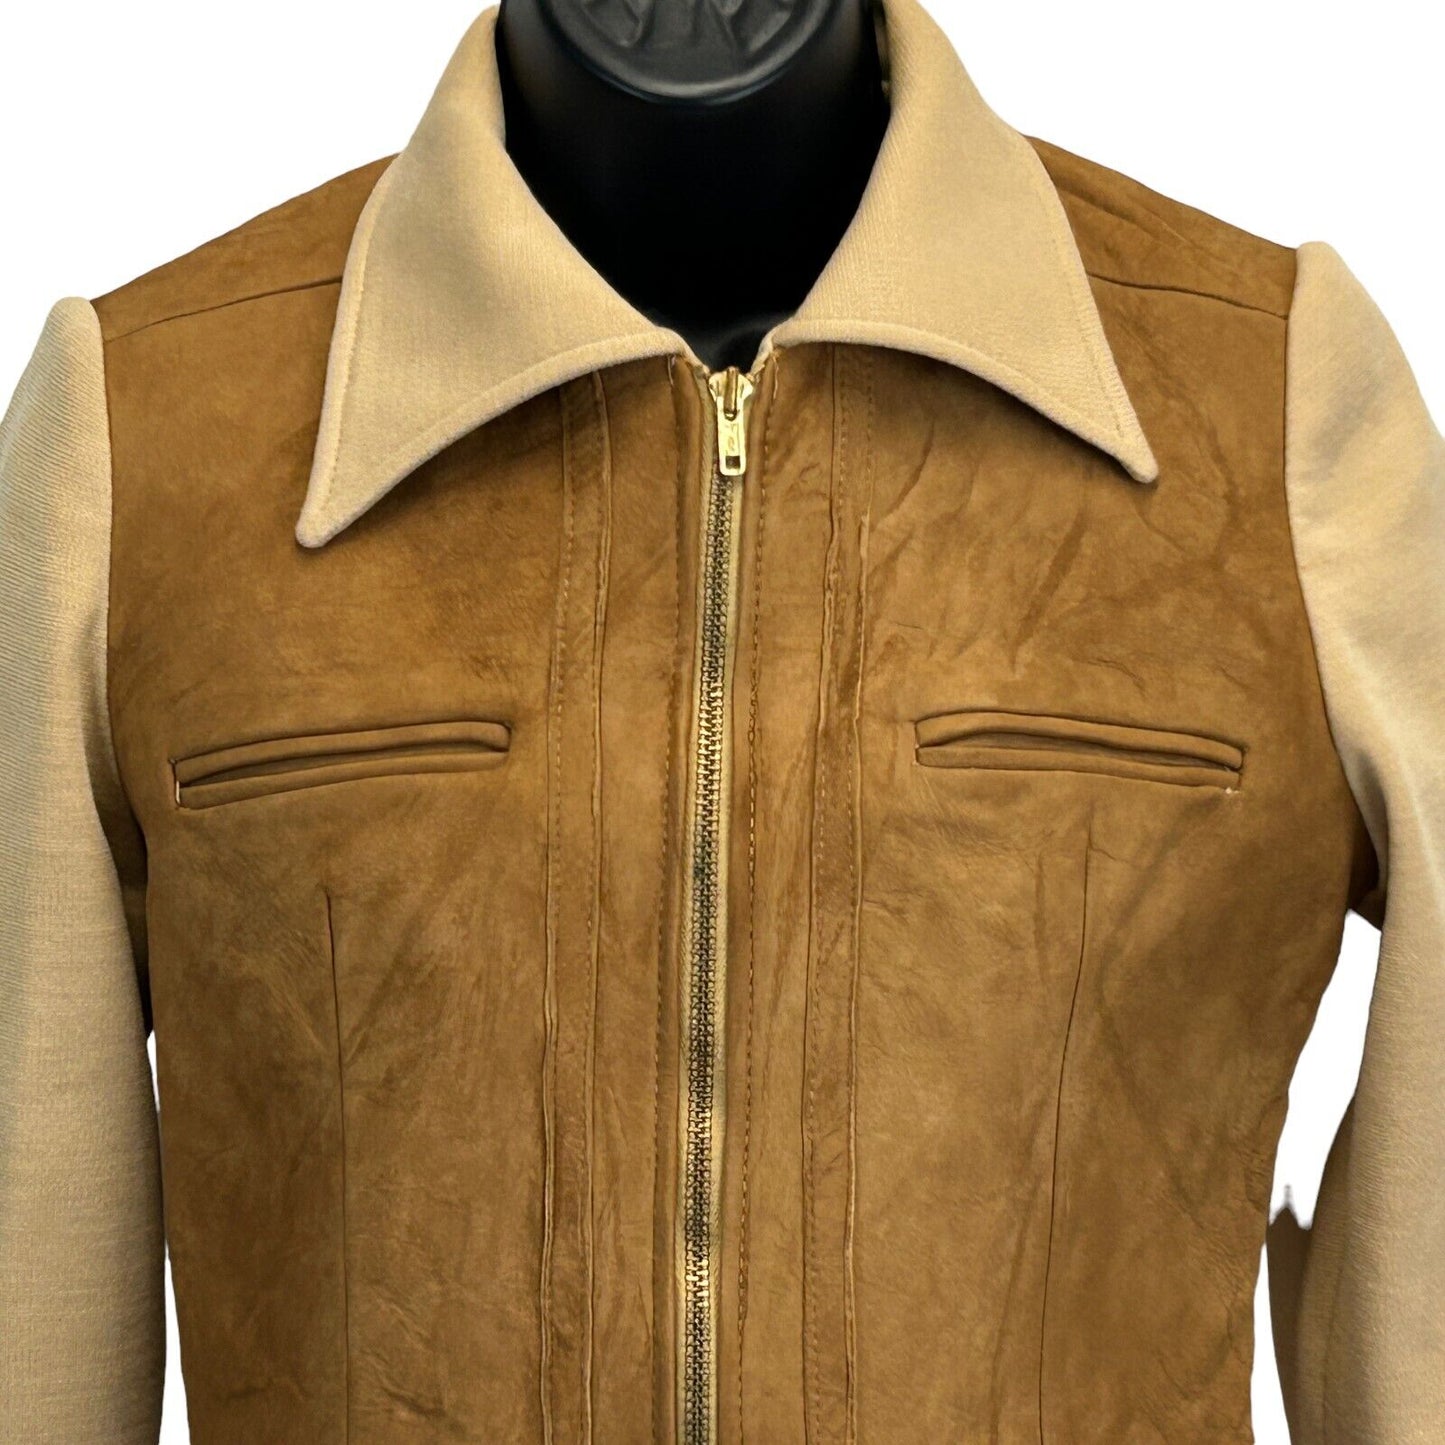 Cowgirl Western Vintage 60s Womens Leather Blend Jacket Cowboy Brown Beige Small